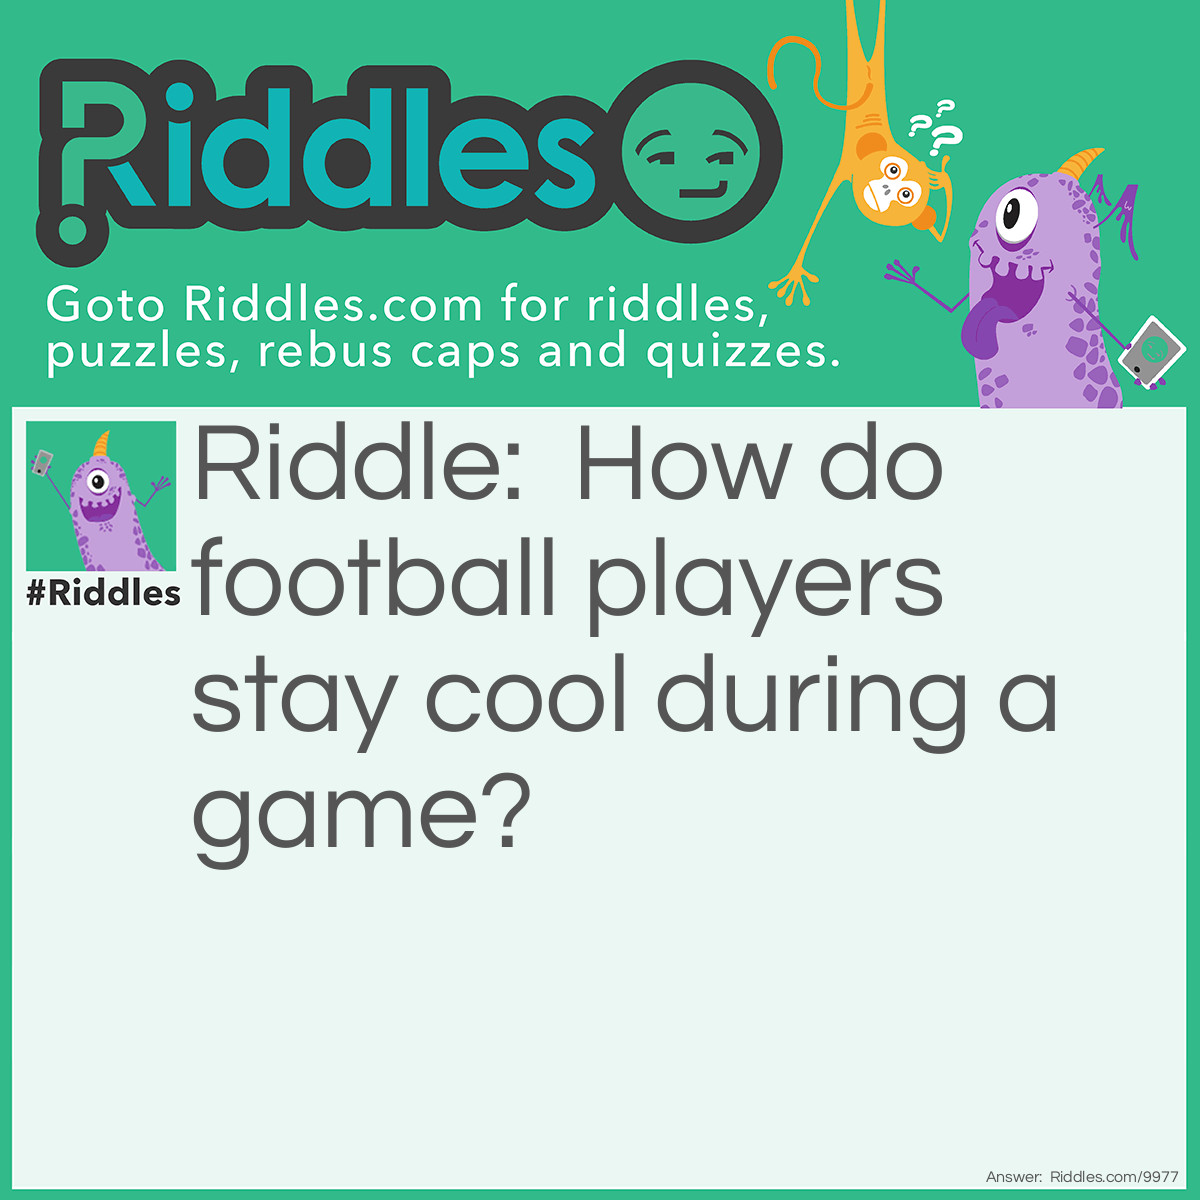 Riddle: How do football players stay cool during a game? Answer: They stay next to the fans!